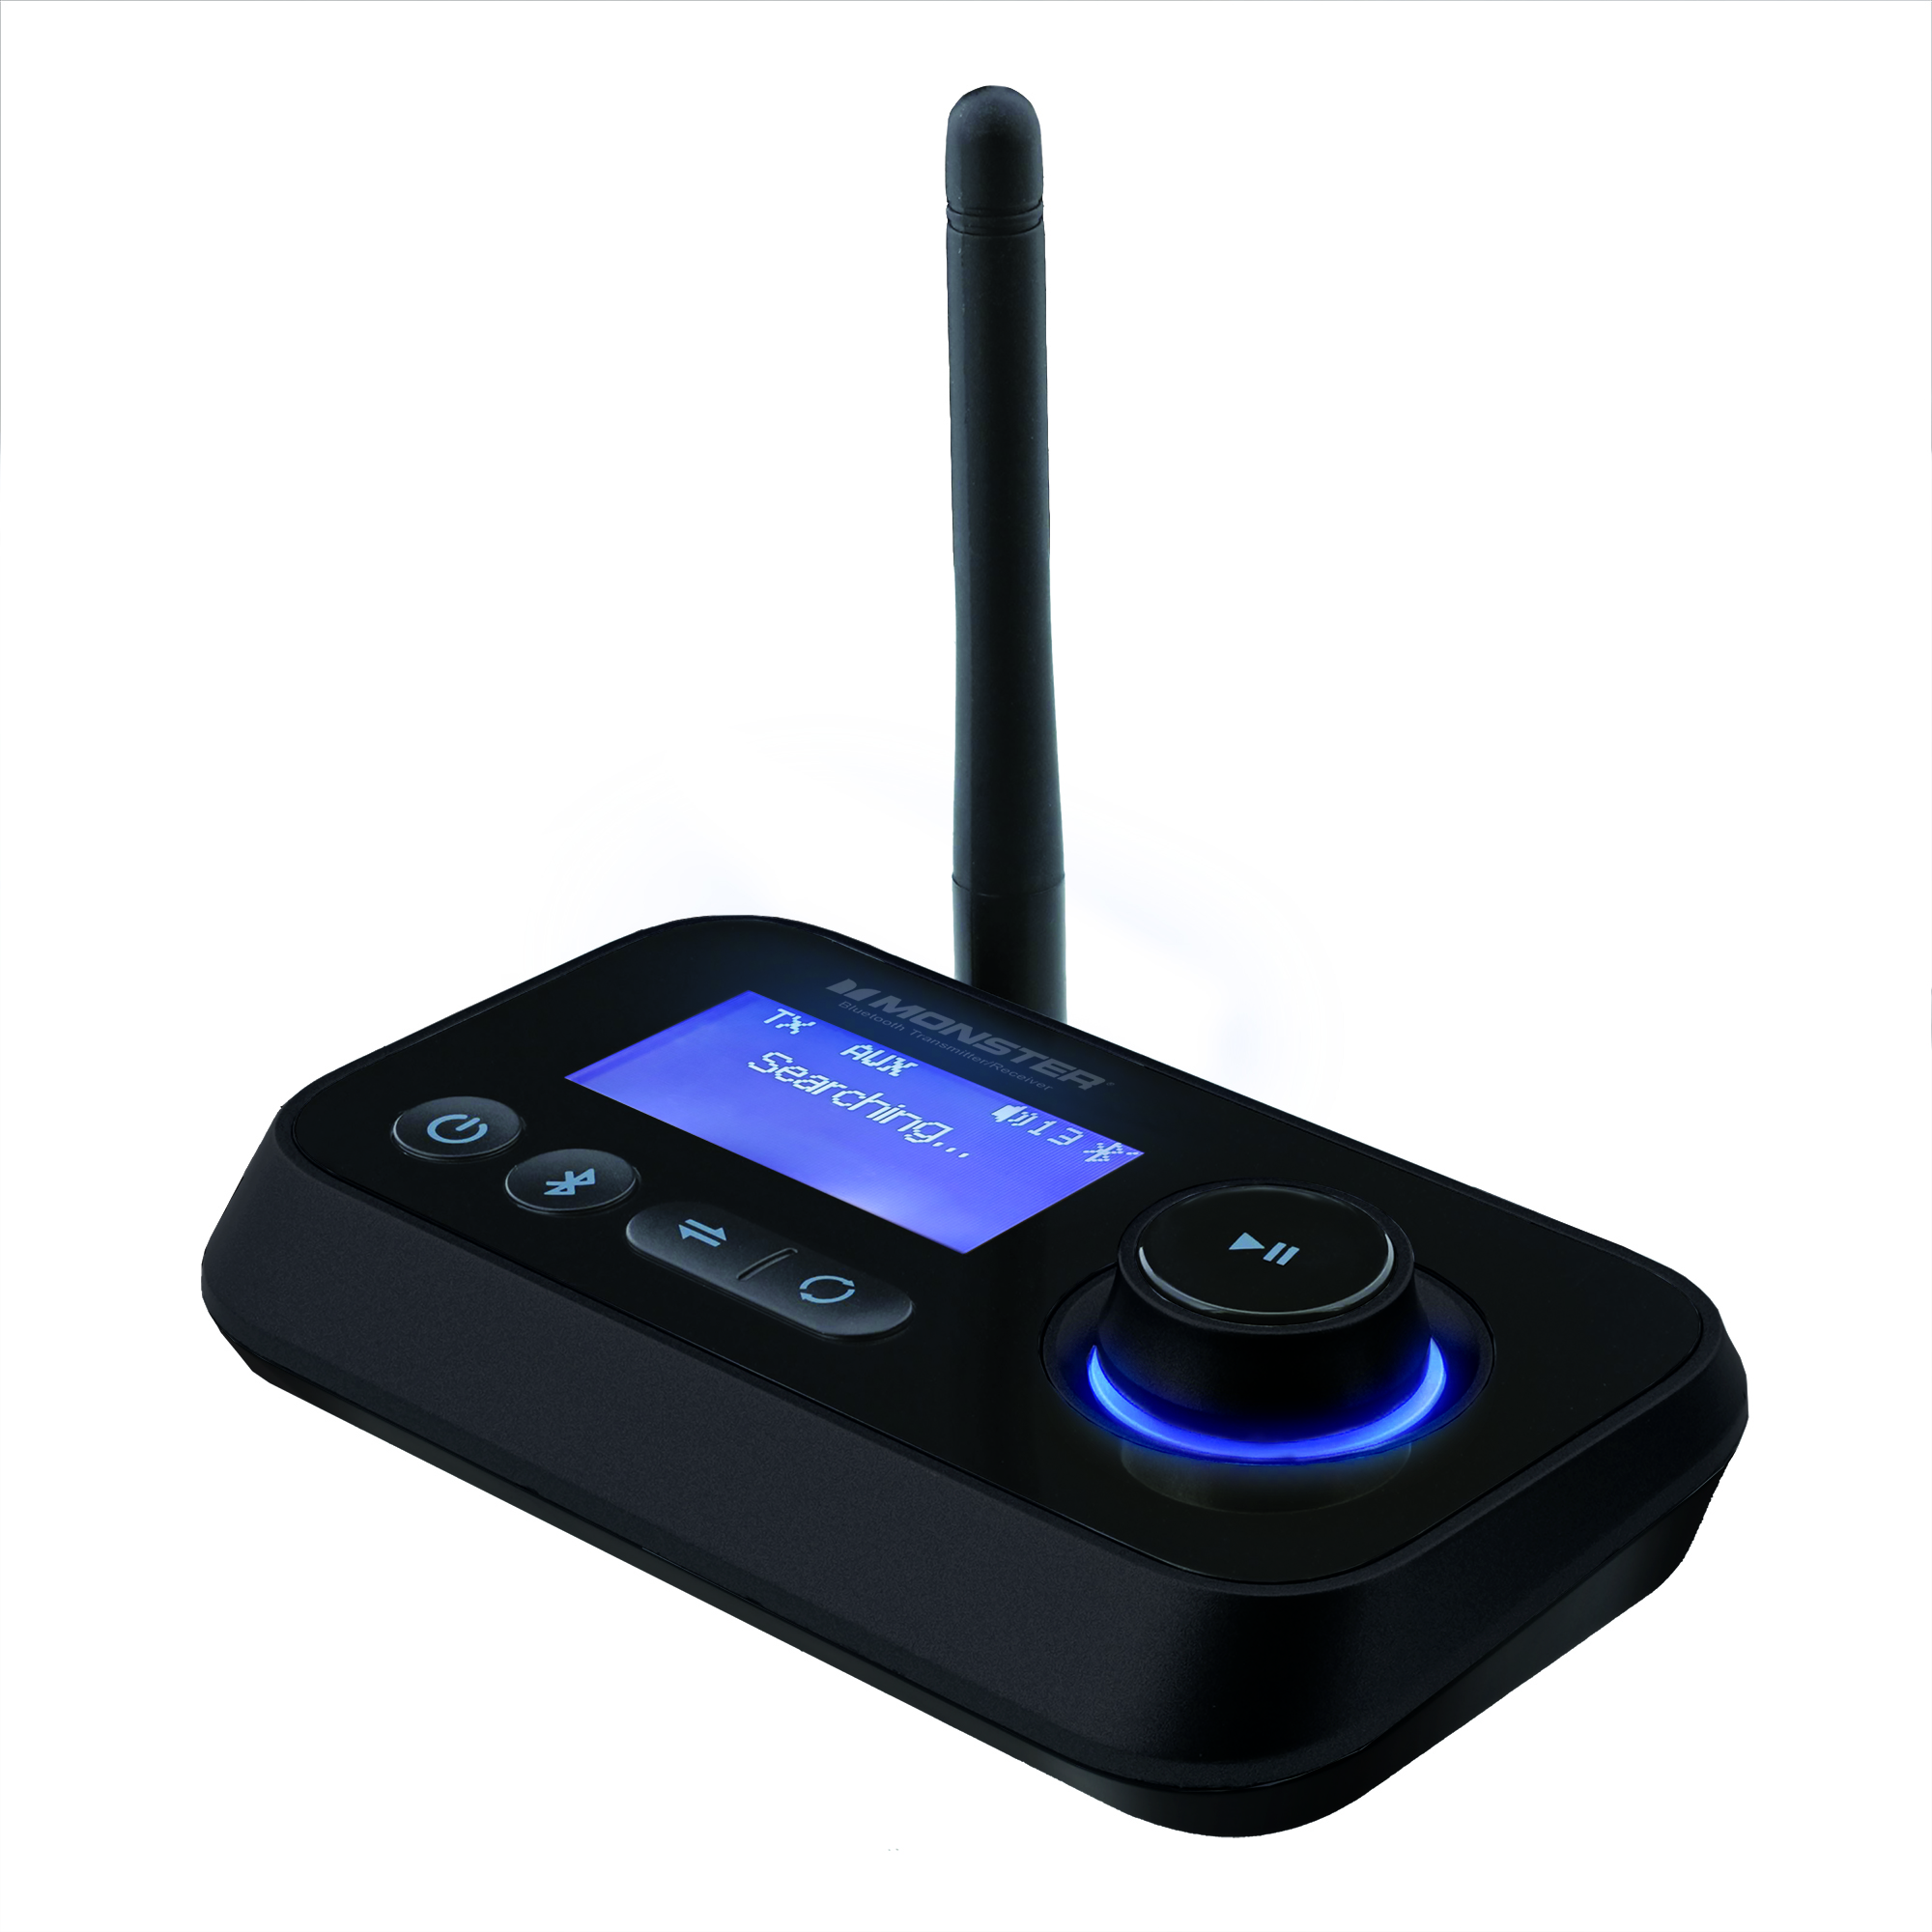 2 In 1 Bluetooth TV Transmitter Receiver, Make Non-Bluetooth Items